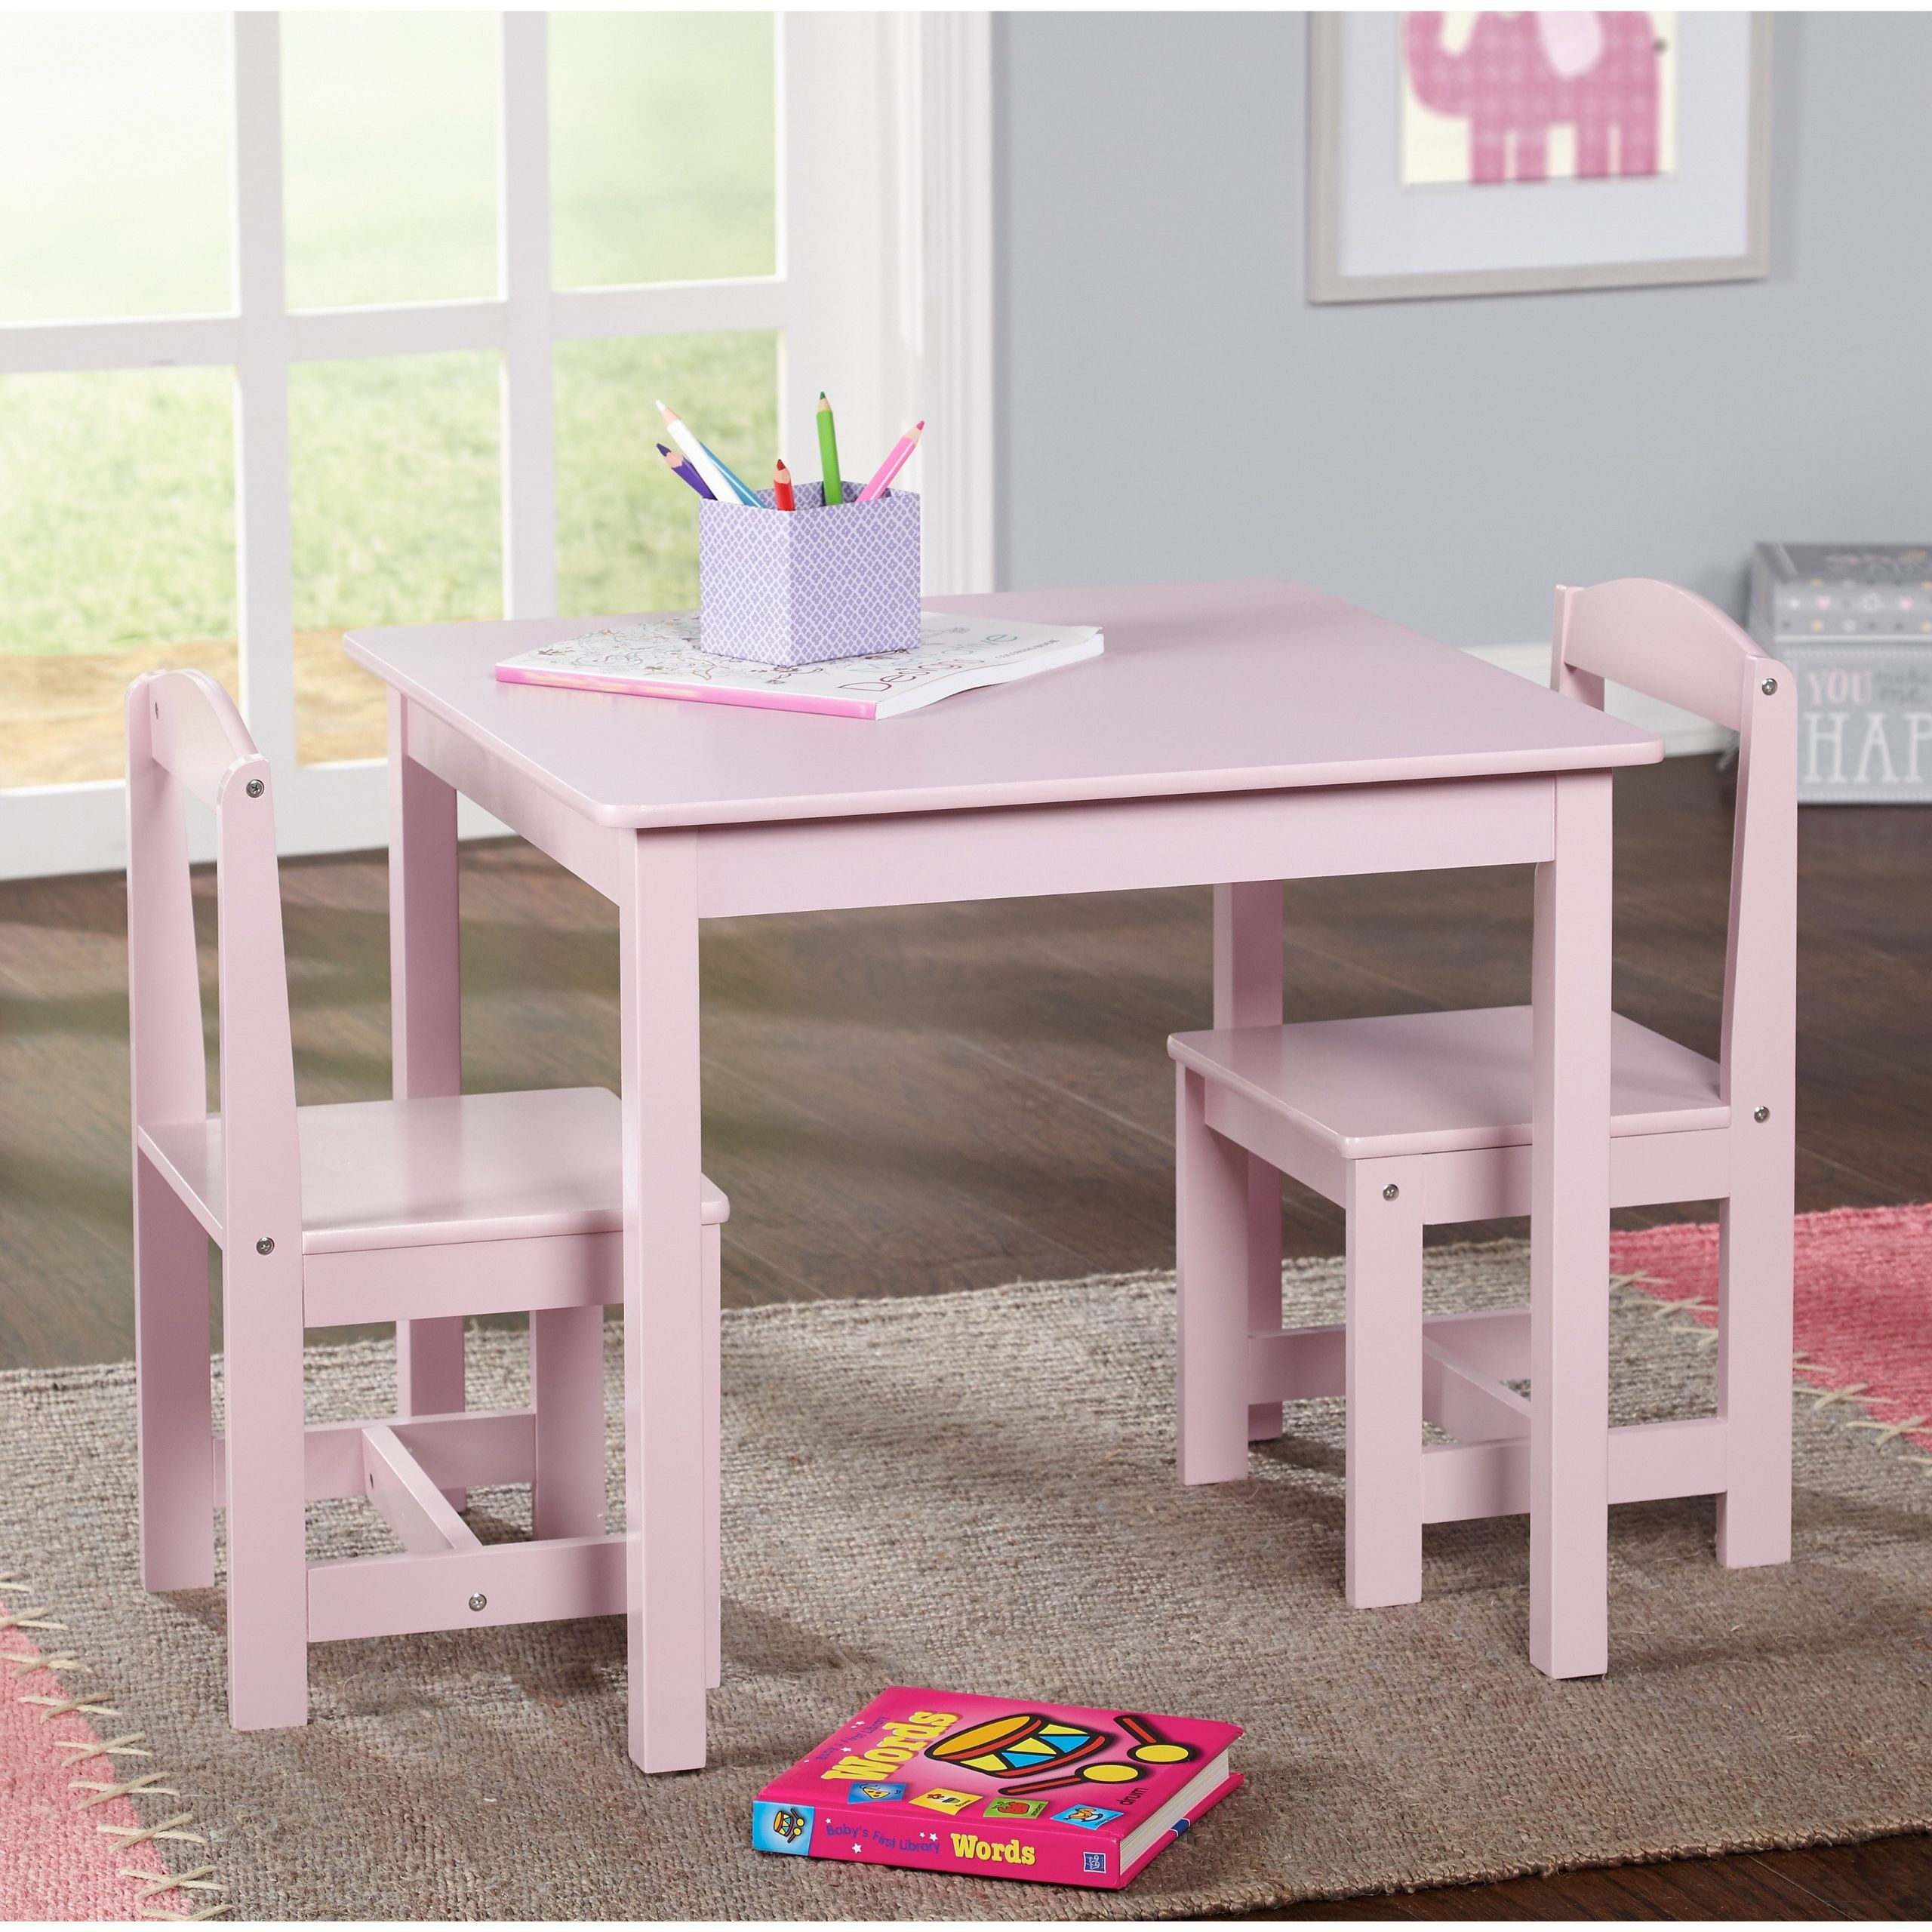 Kids Craft Tables And Chairs
 Kids Craft Table Modern And Chairs Children Activity